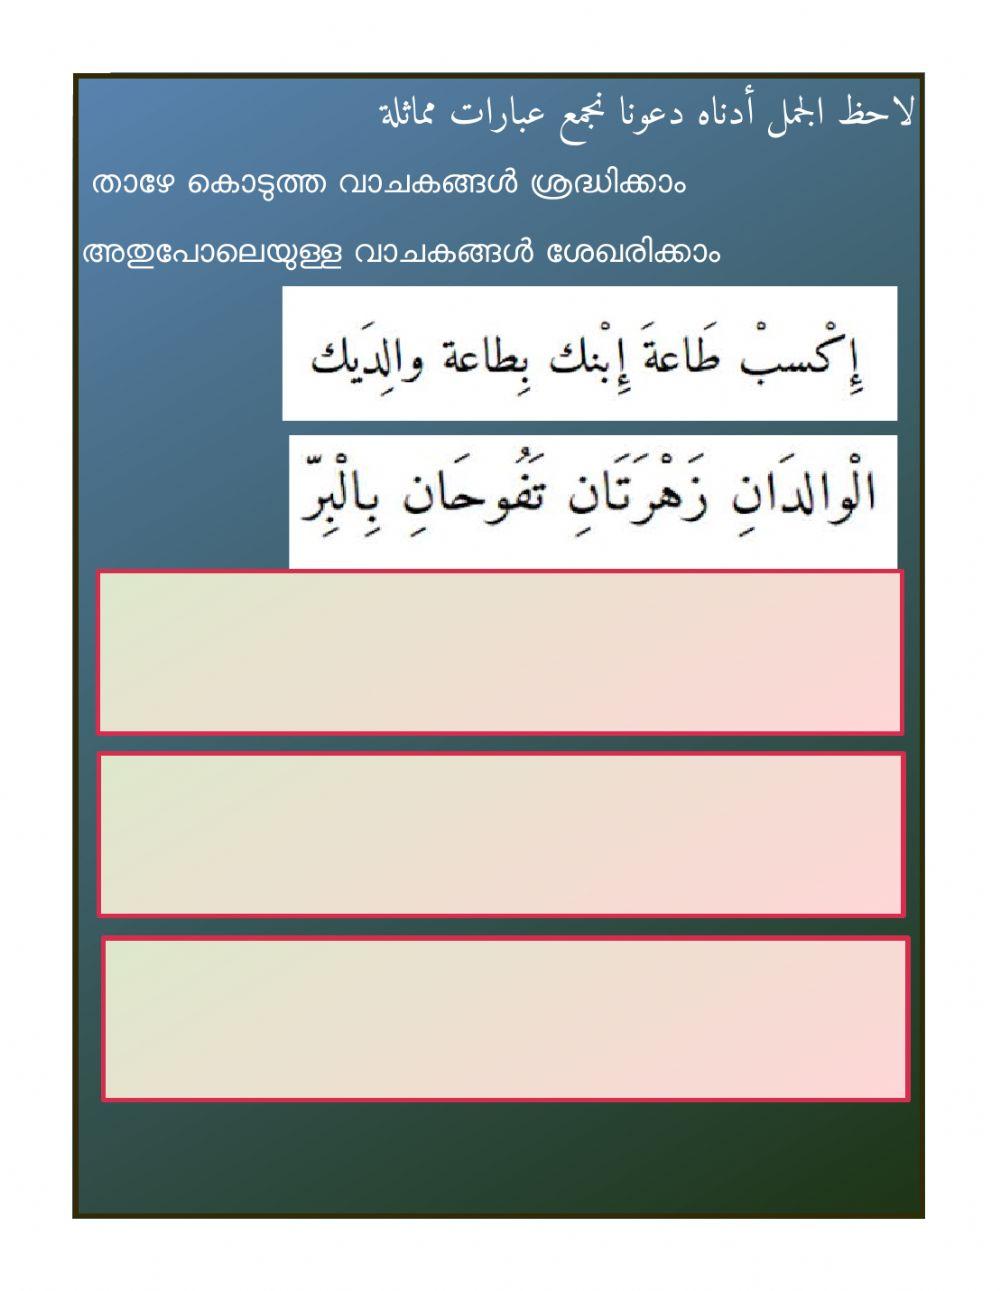 Class 9 arabic worksheet 4 based on first bell